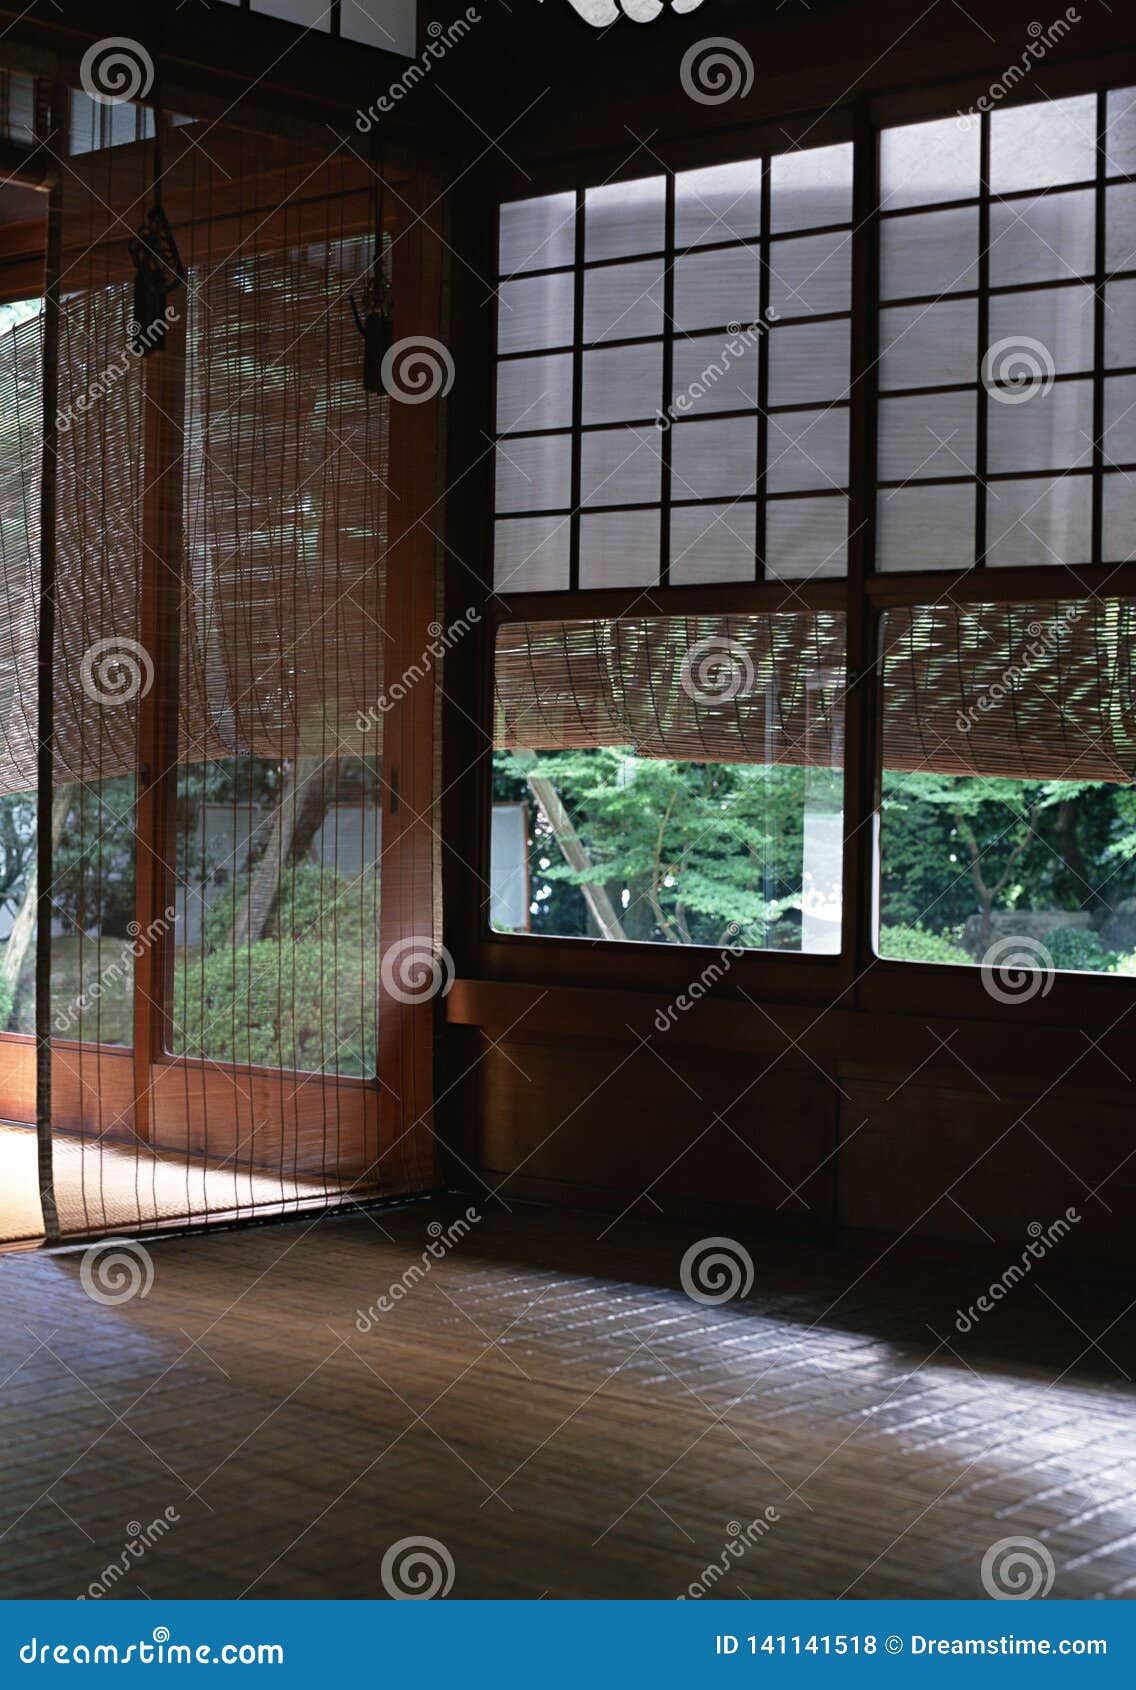 Japanese House Interior Wooden Window With White Texture